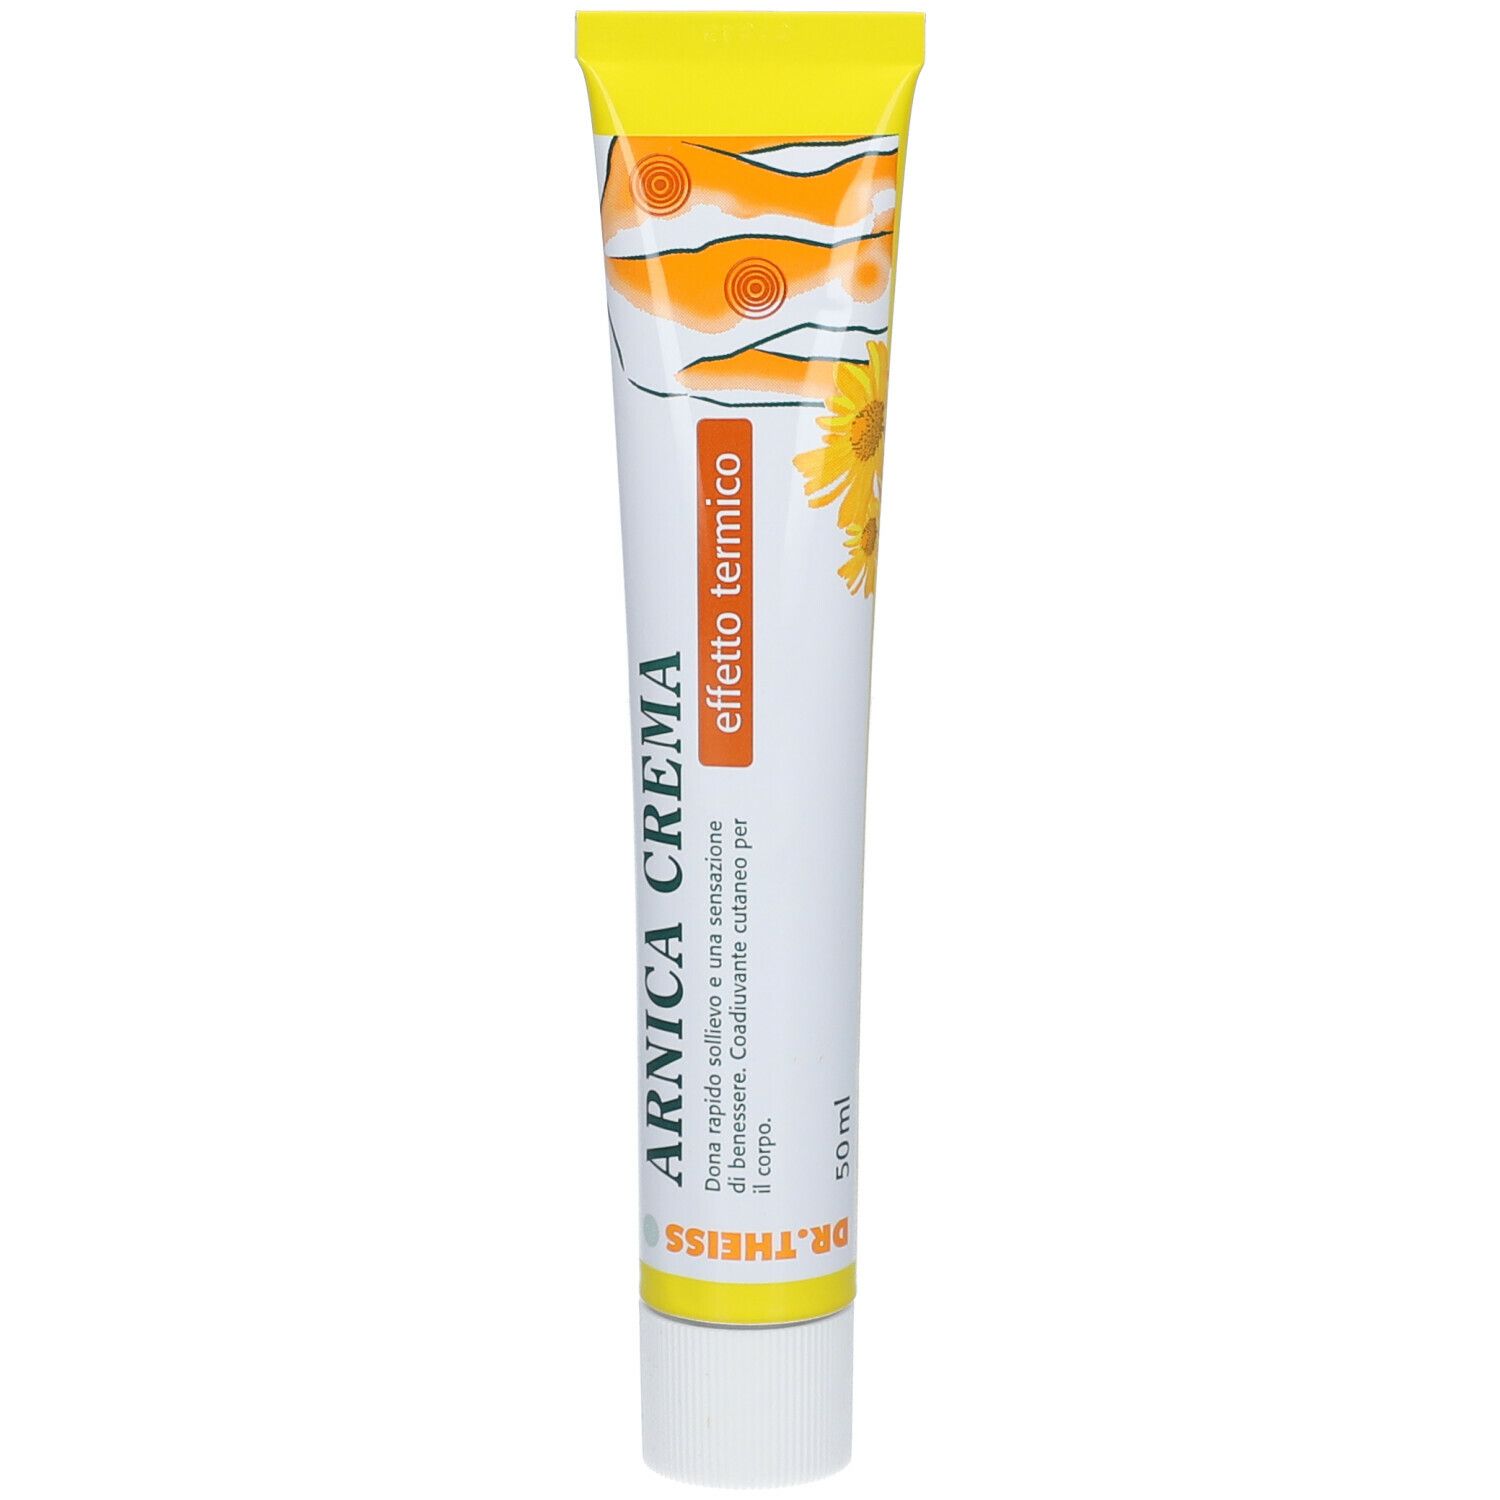 Image of Dr. Theiss Arnica Creme